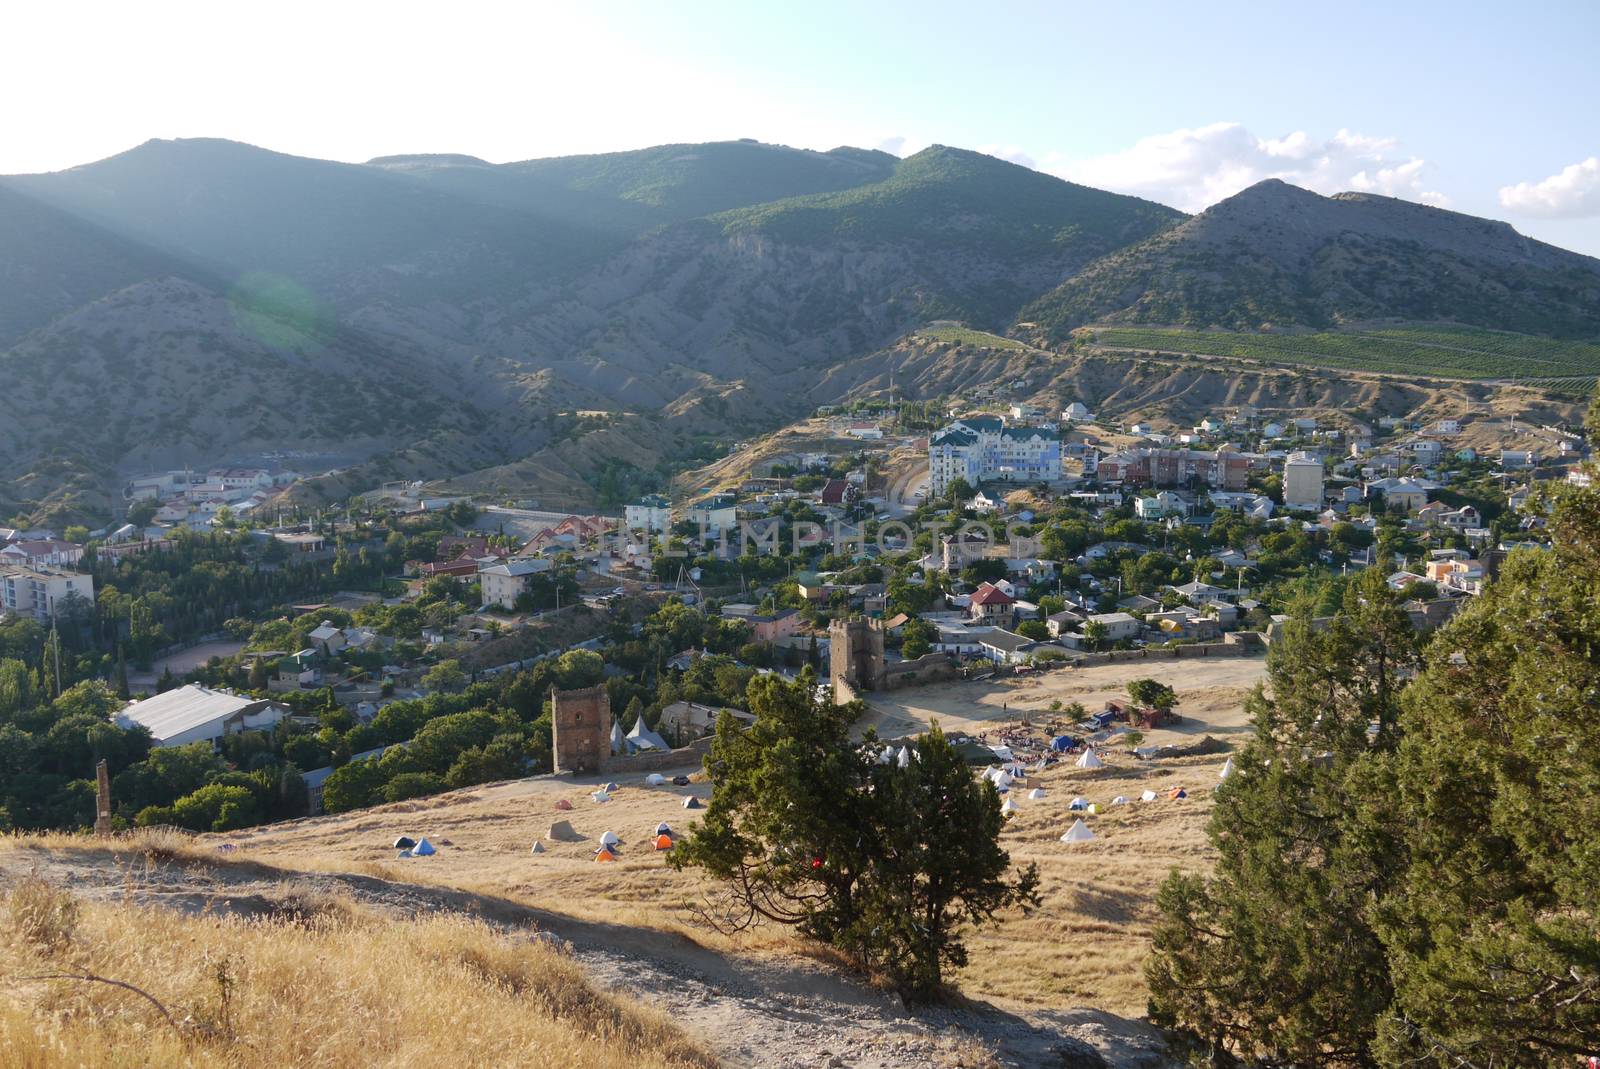 sandy slopes on the background of a cozy town and high mountains covered with grass